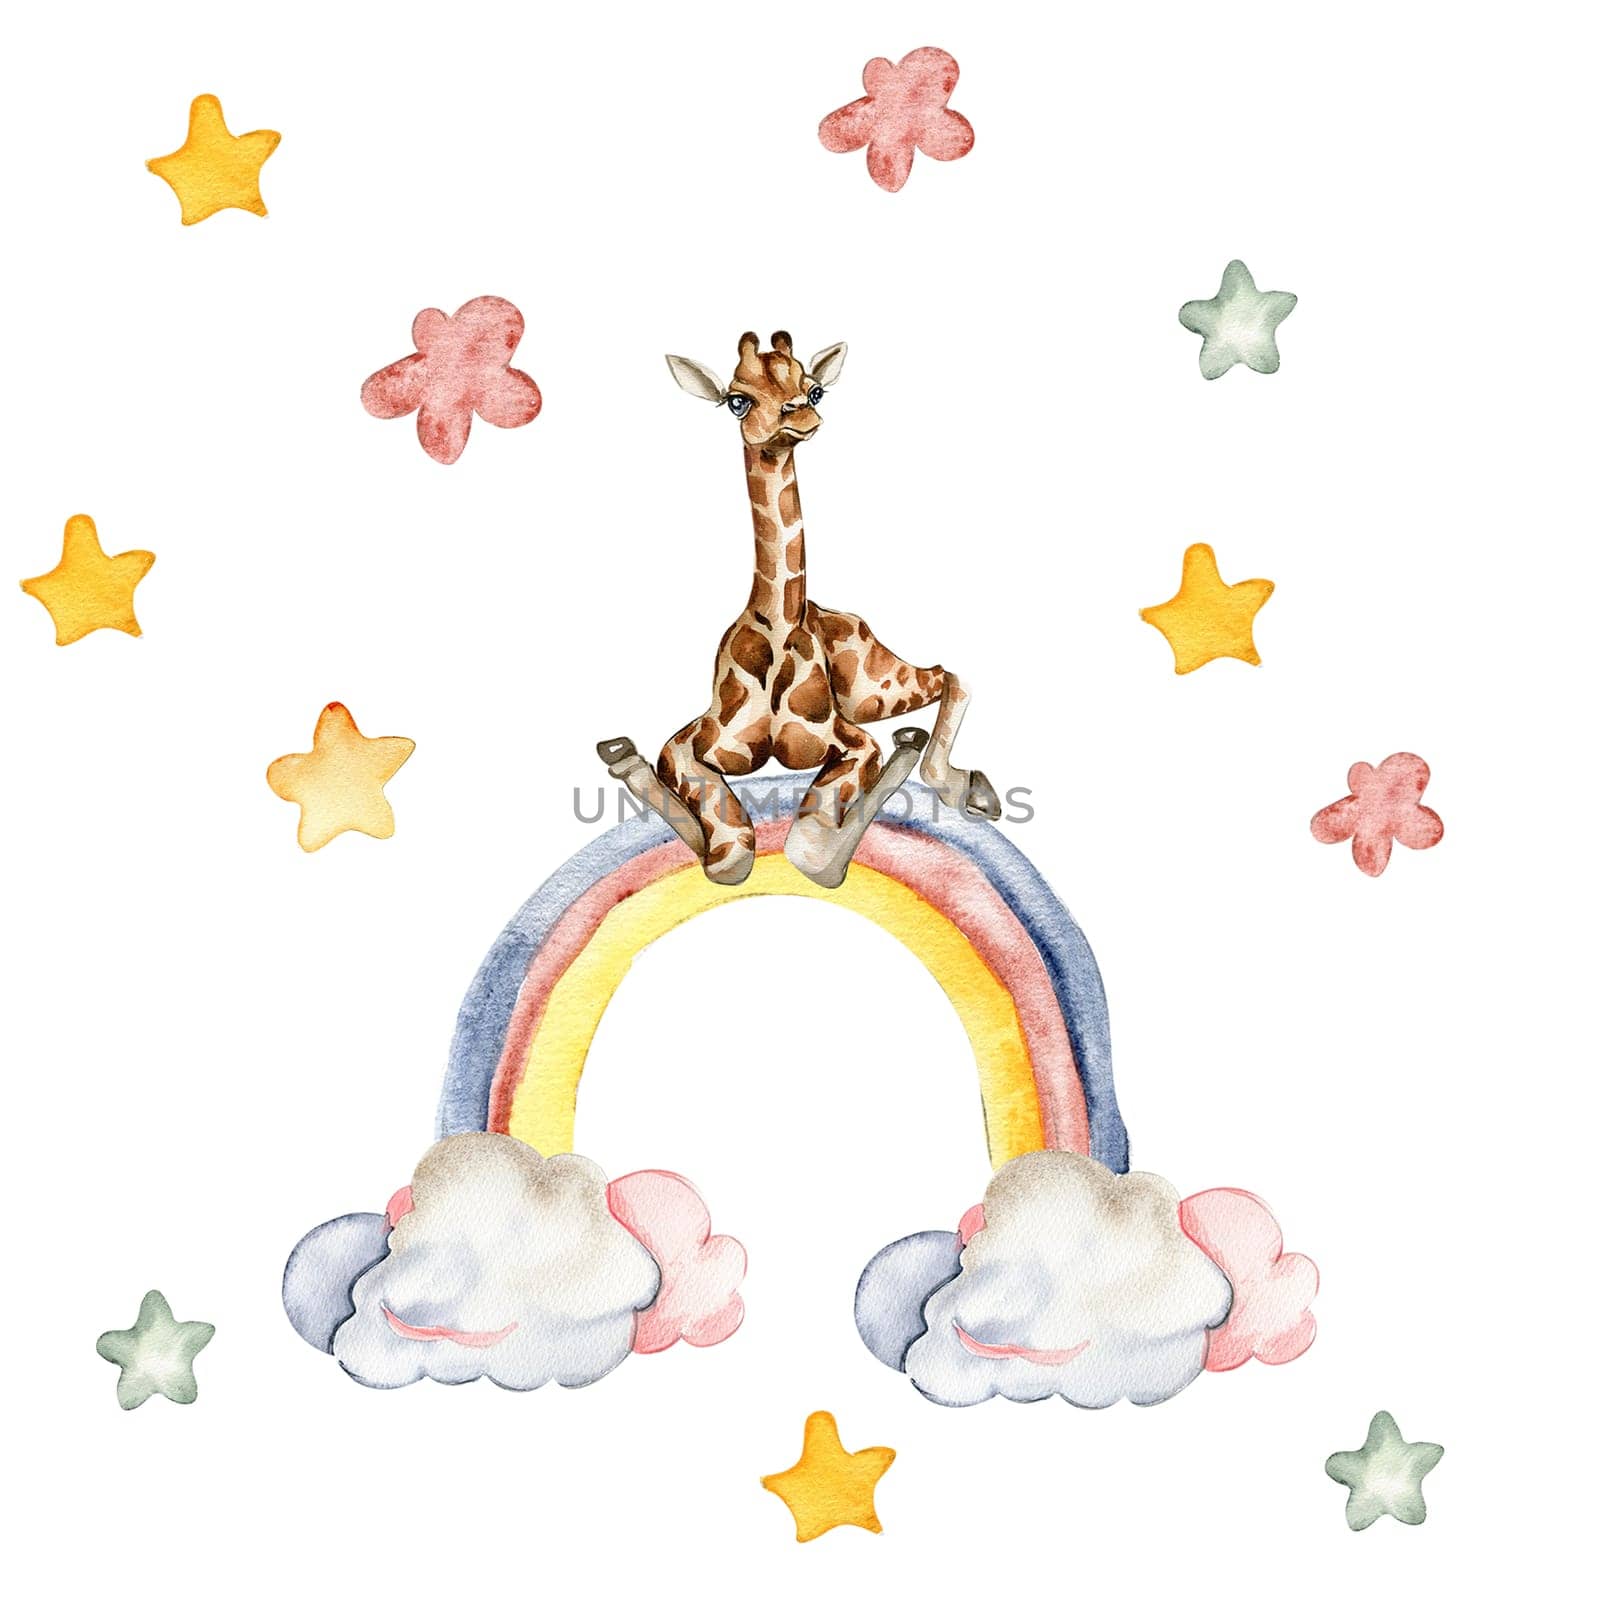 Watercolor hand painted cute rainbow.and giraffe Illustration isolated on white background. Design for baby shower party, birthday, cake, holiday design, greetings card, invitation.